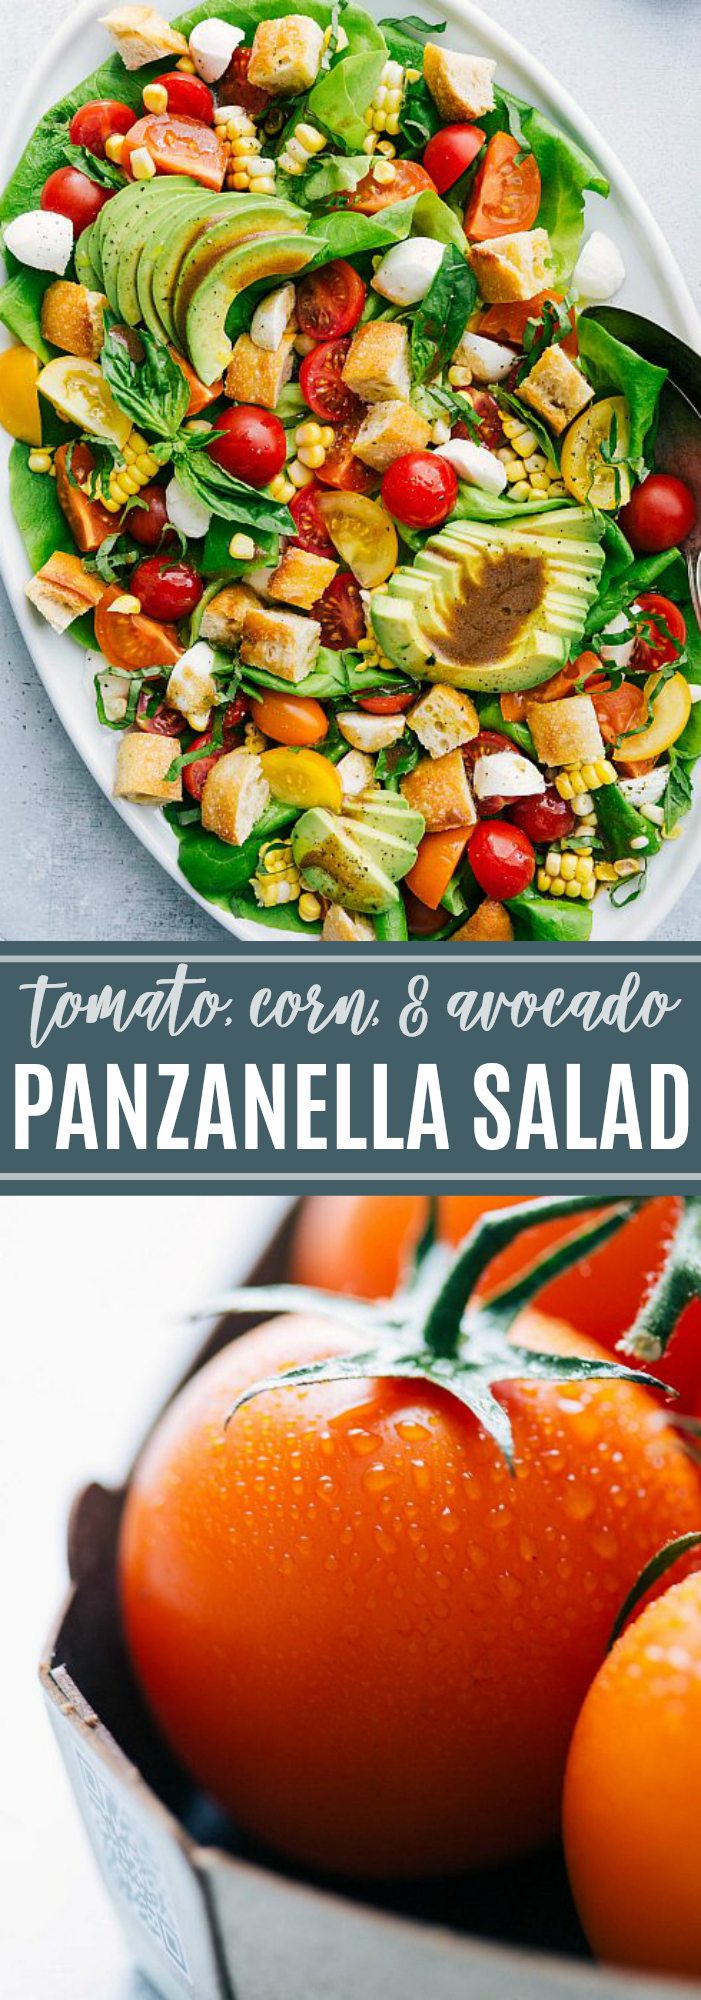 The best simple panzanella salad with lots of fresh veggies and a delicious balsamic dressing chelseasmessyapron.com #salad #panzanella #tomato #corn #basil #avocado #bread #sourdough #balsamic #dressing #healthy #easy #kidfriendly #quick #dinner